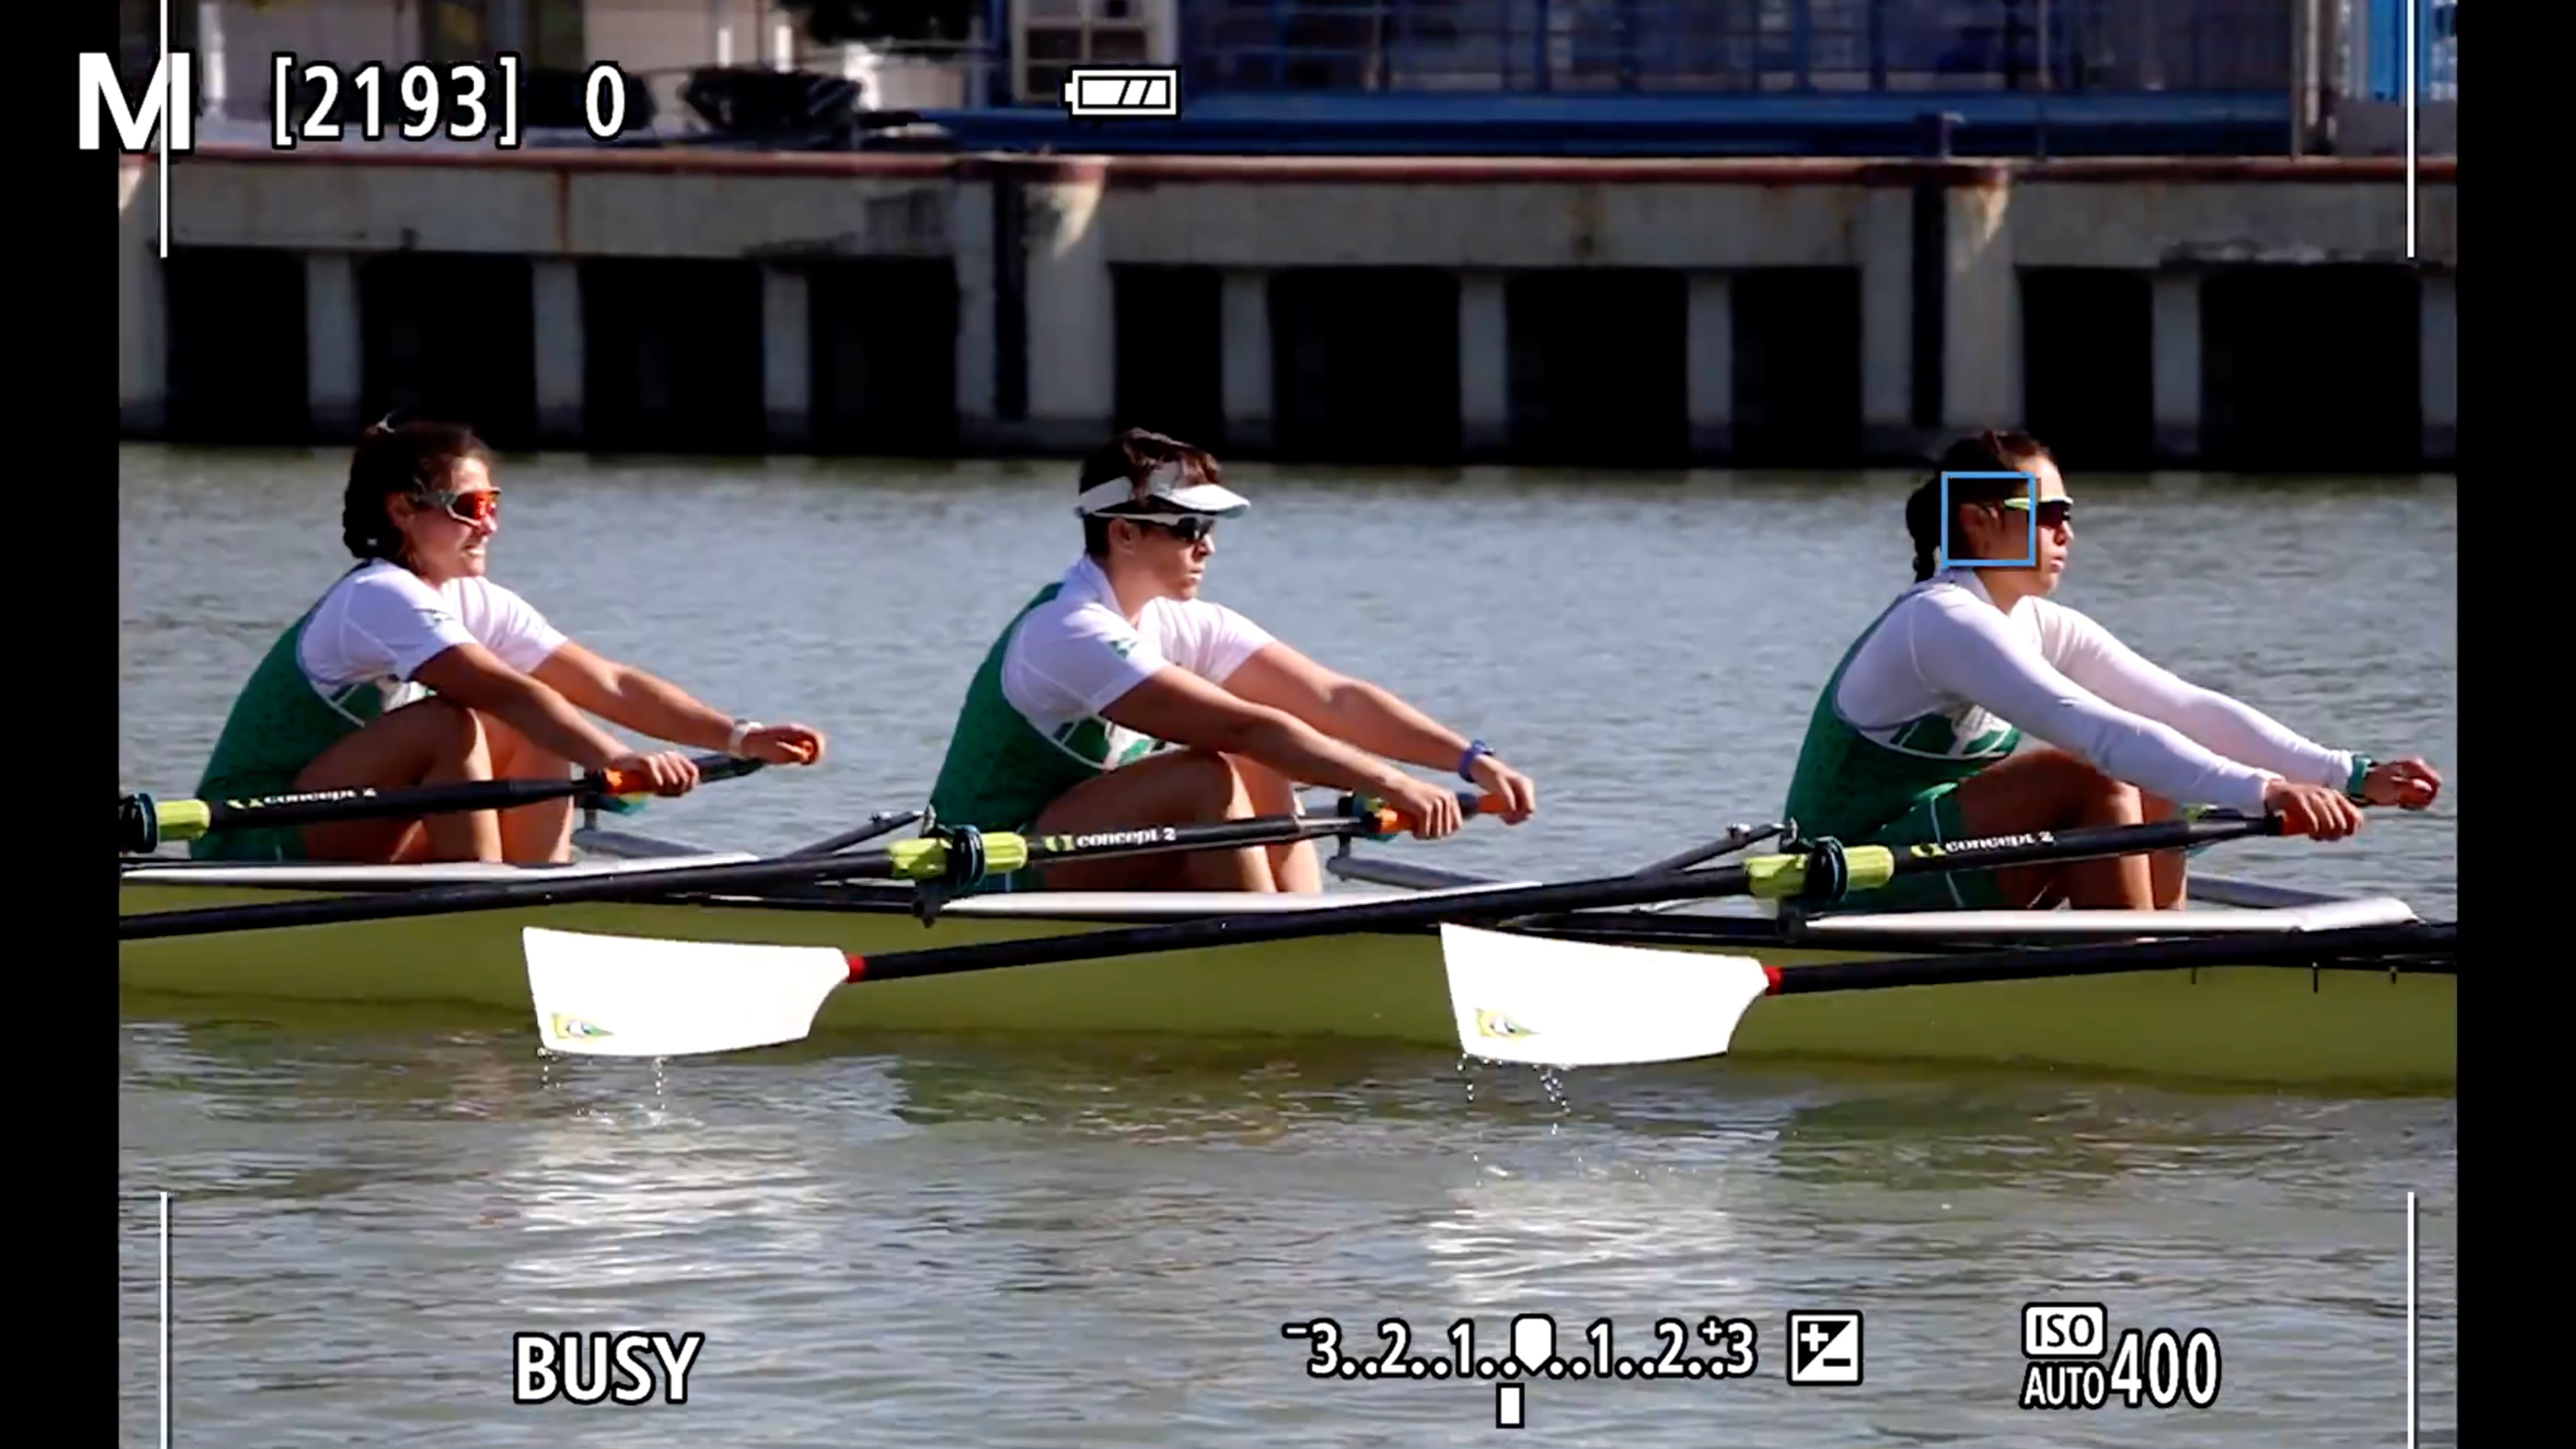 Some rowers when viewed through the viewfinder of a Canon EOS R10 camera